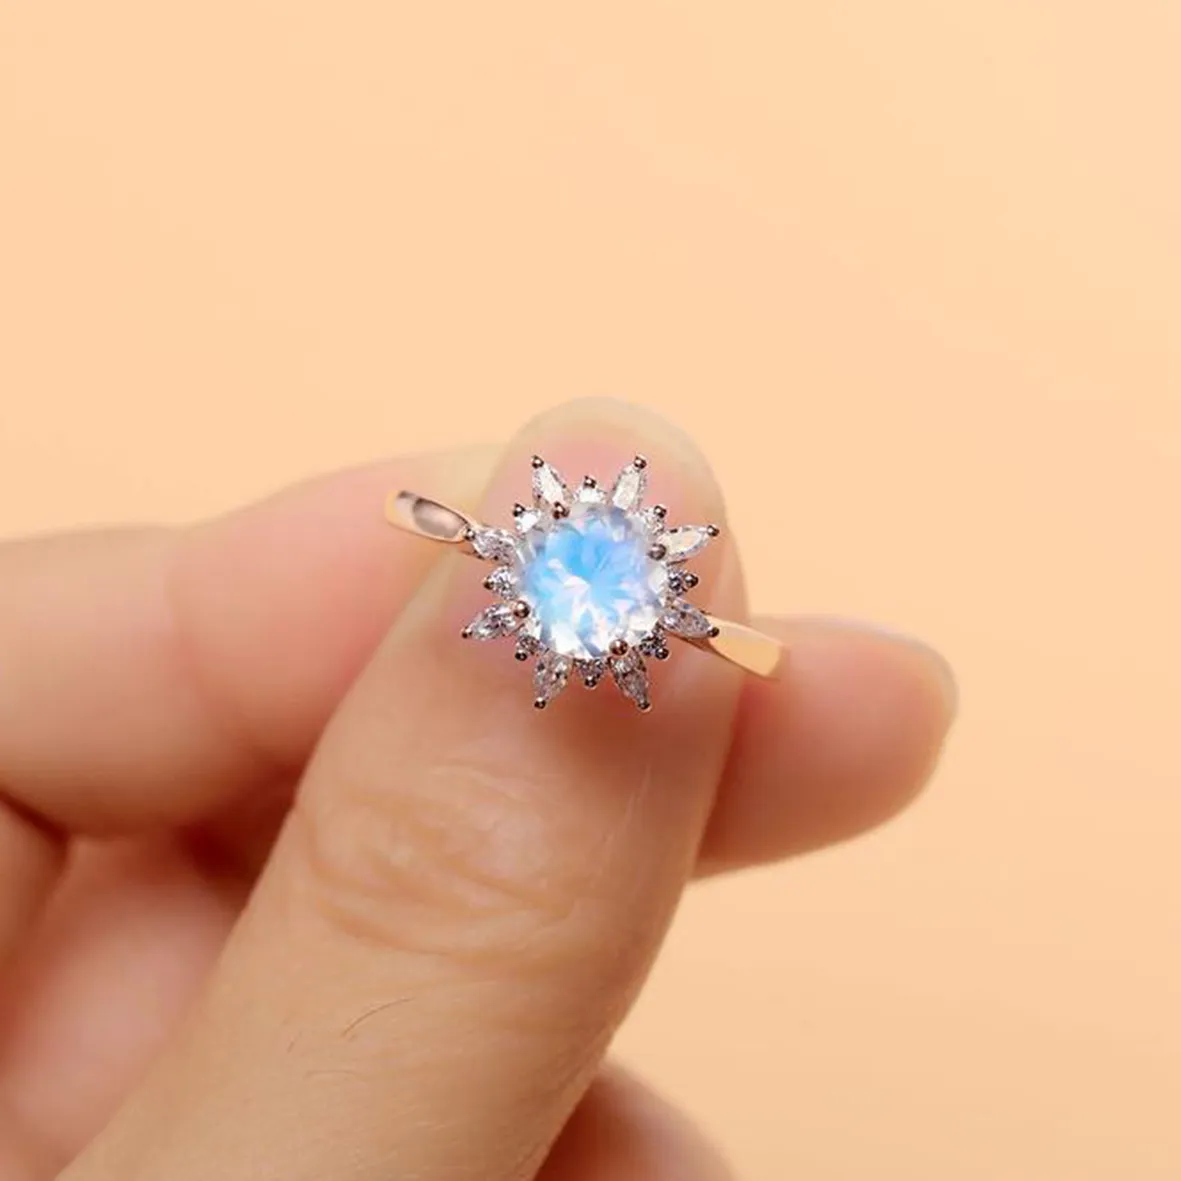 Beautiful 925 Sterling Silver Jewelry Roun Cut 7mm Rainbow Blue Natural Moonstone Engagement Wedding Ring For Women Gift